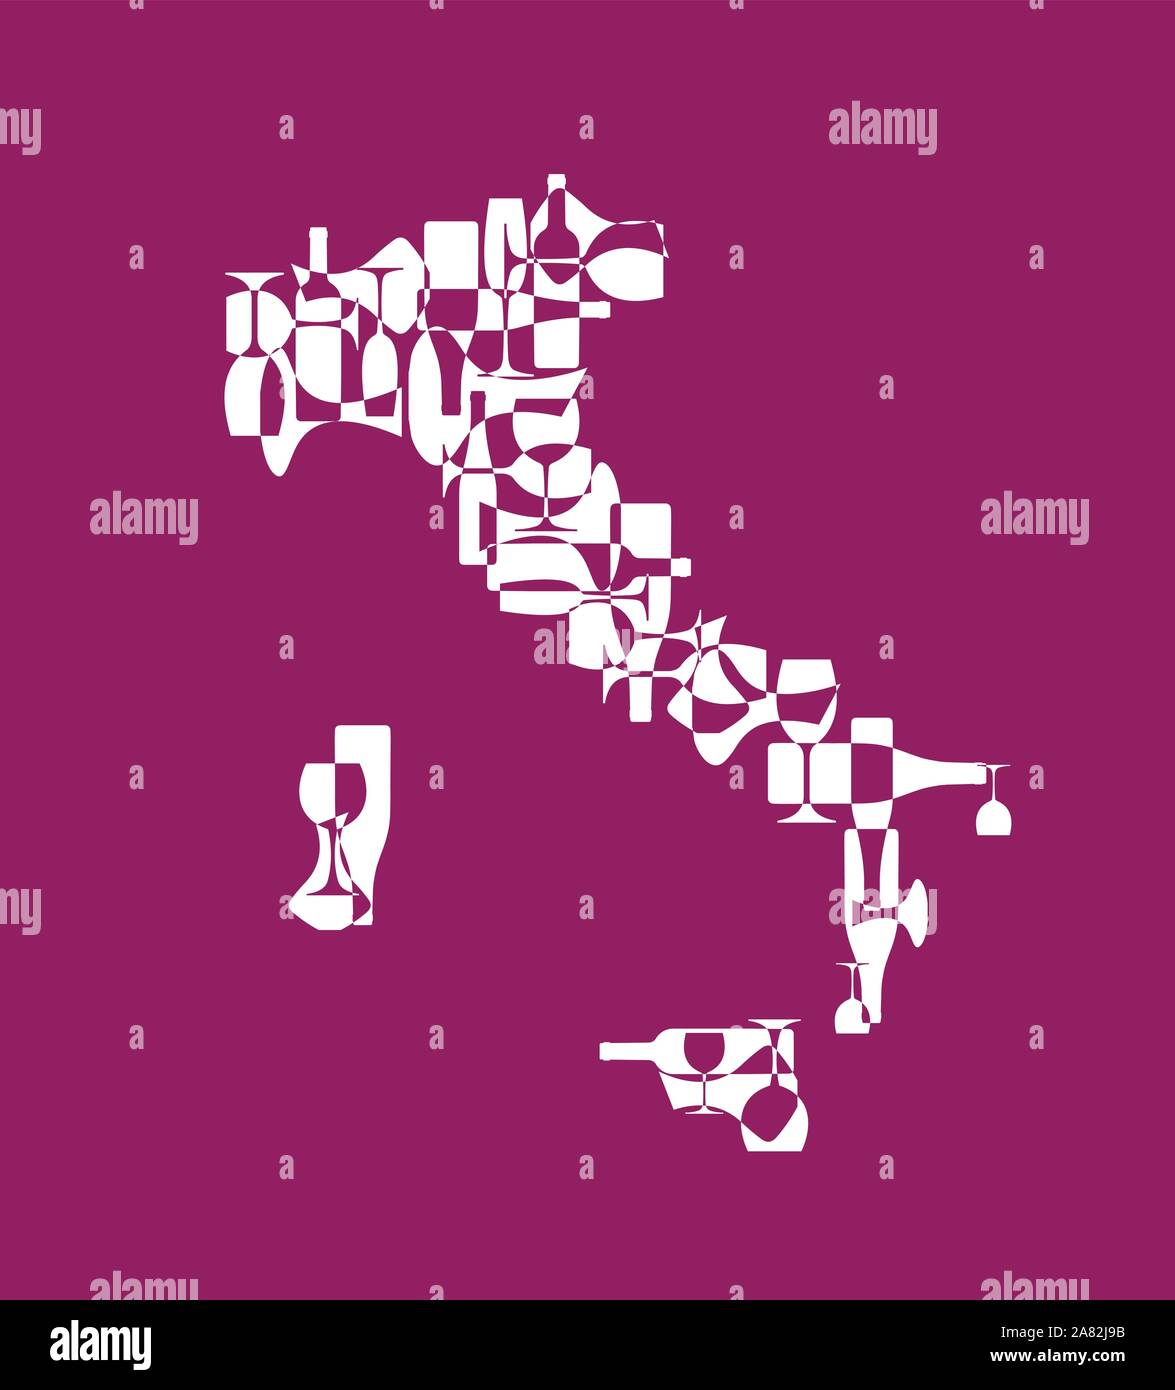 Countries winemakers - stylized maps from silhouettes of wine bottles, glasses and decanters. Map of Italy. Stock Vector